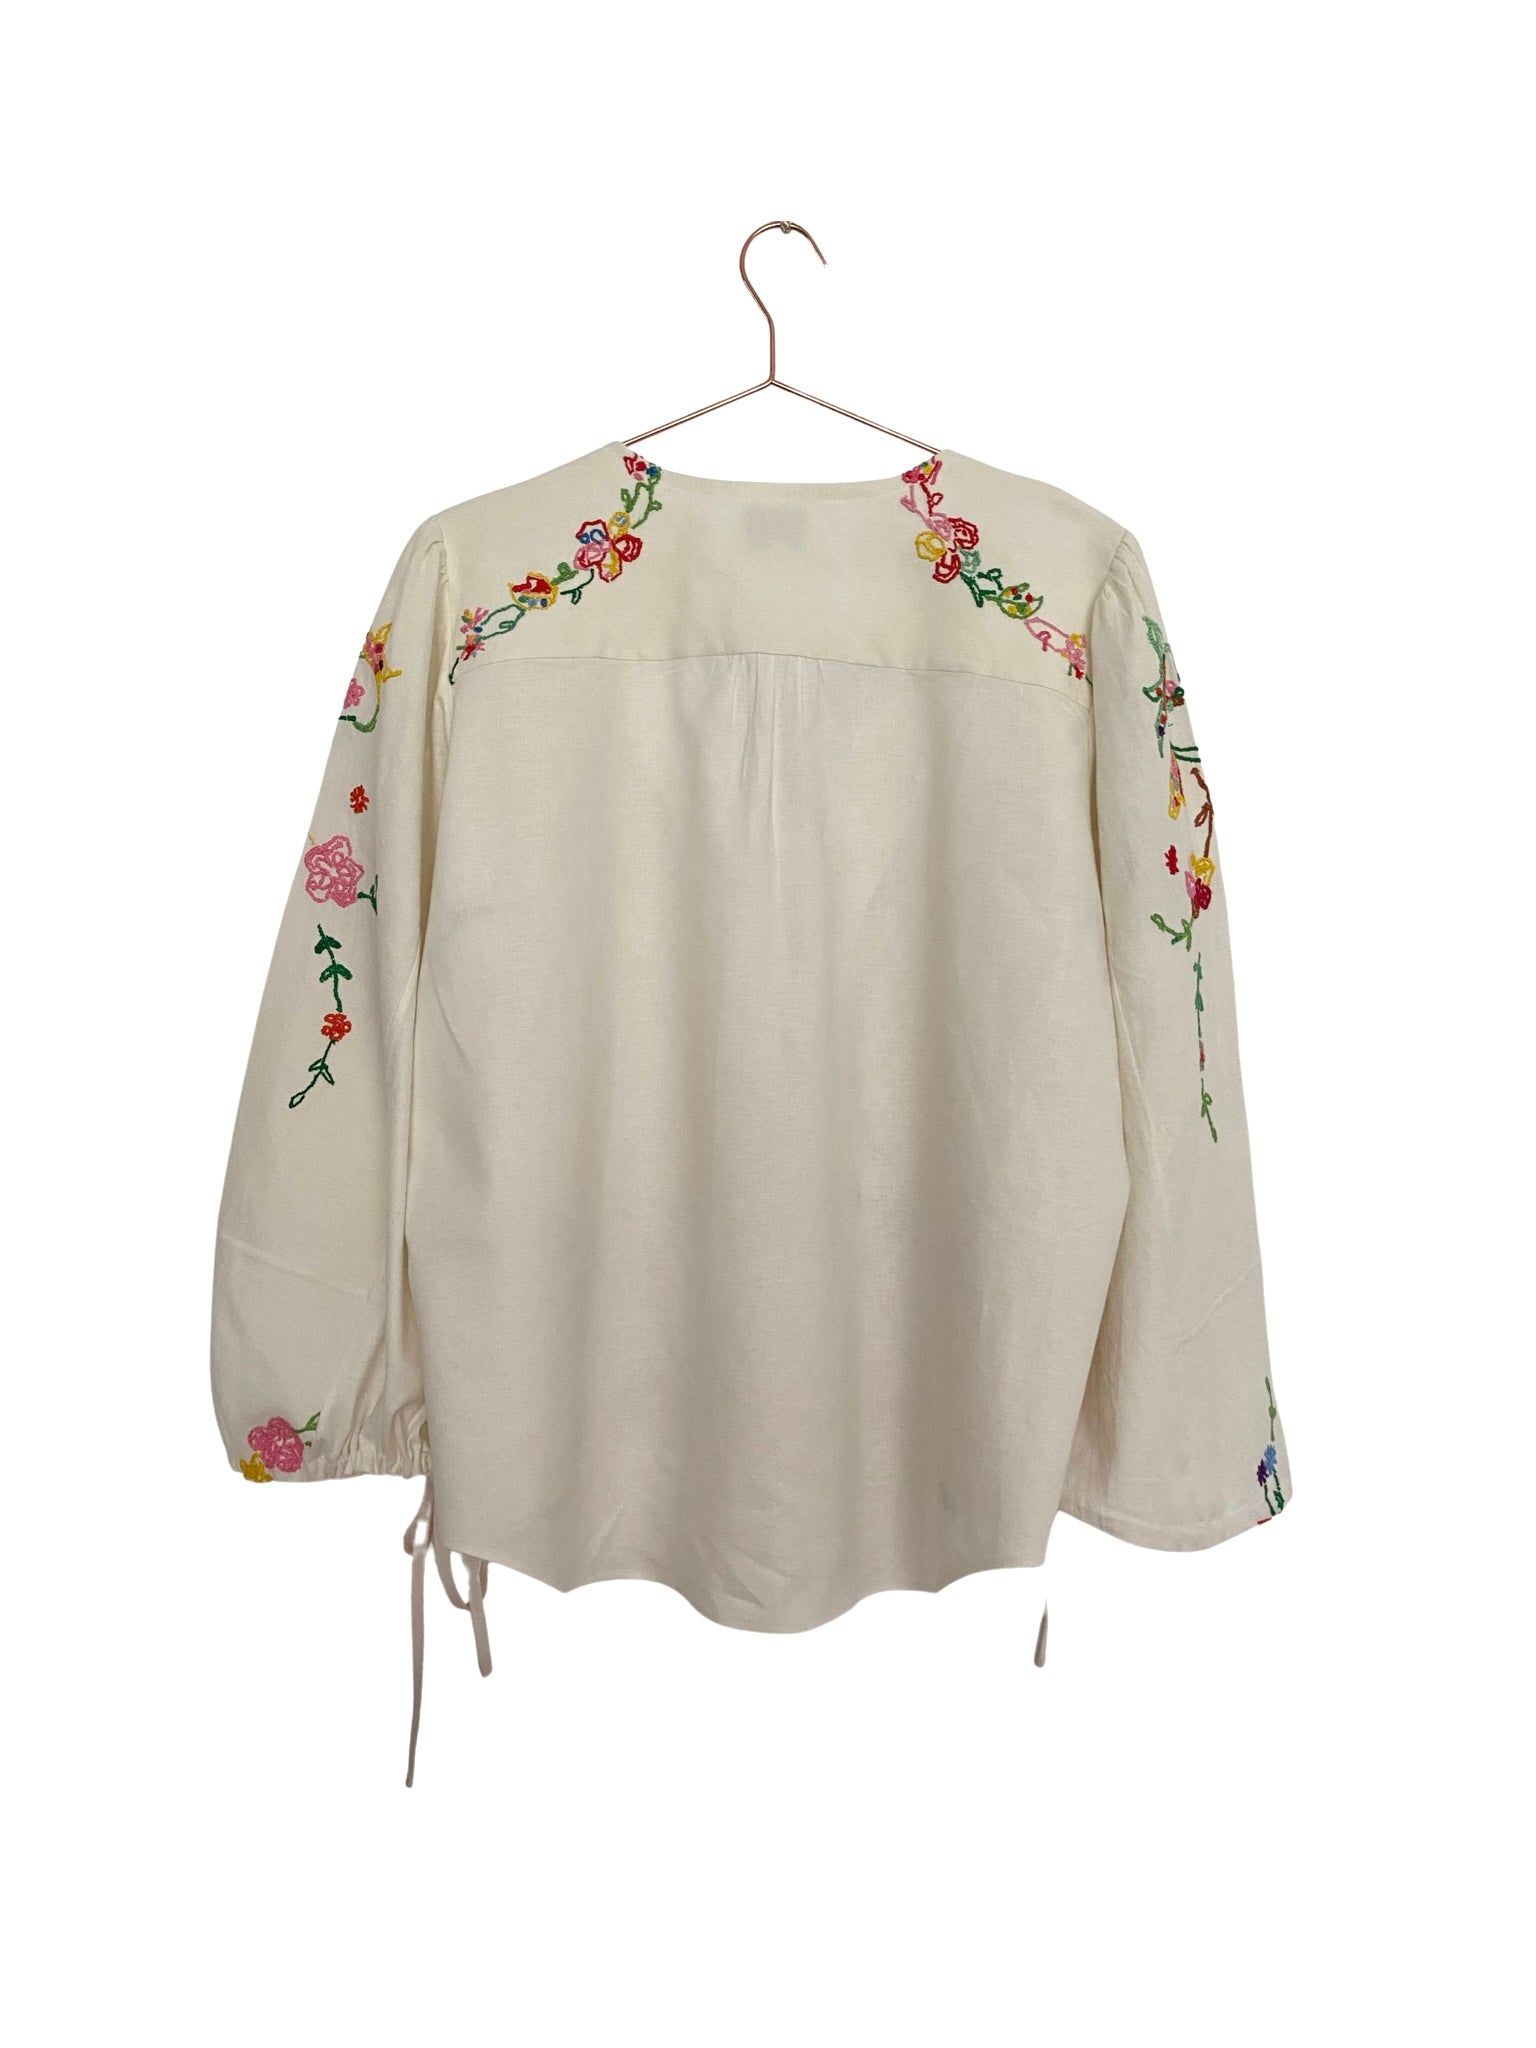 Claddagh Blouse Cream with Embroidery M